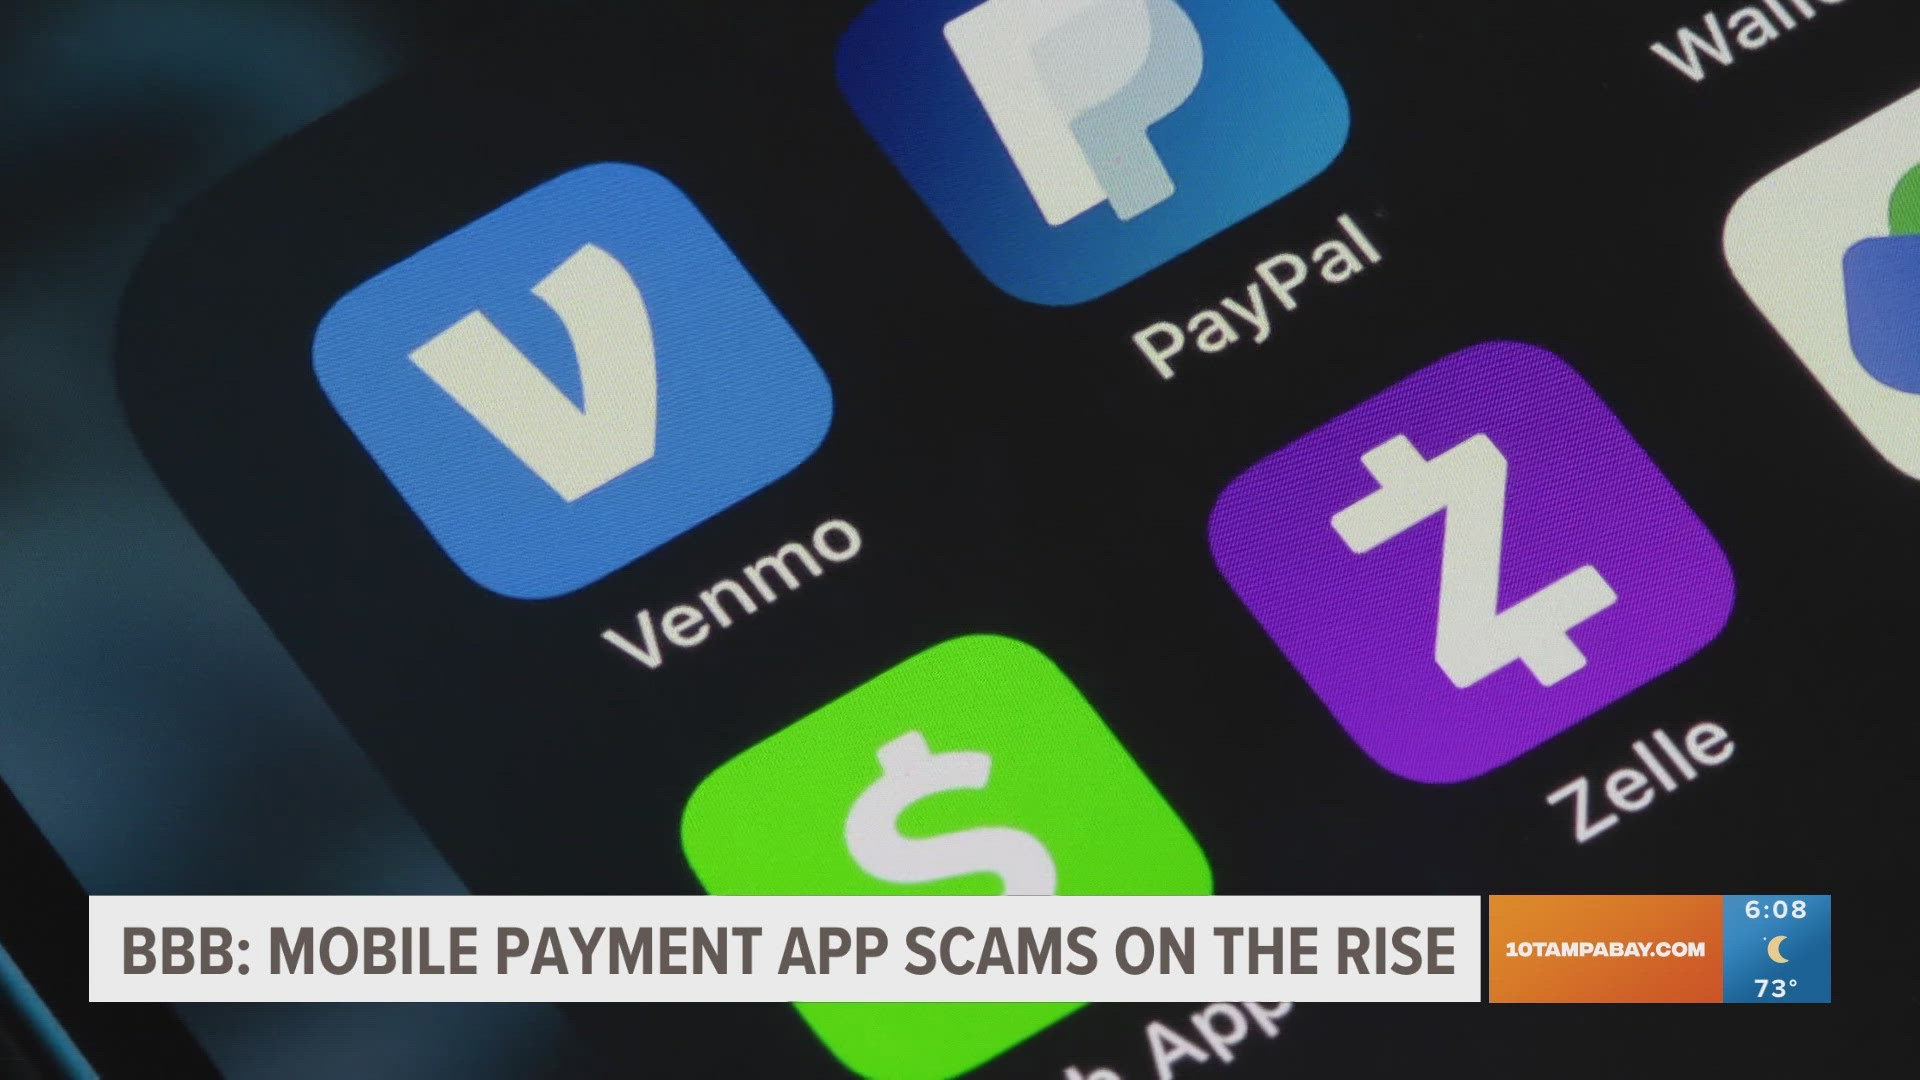 A mobile payment app scam is on the rise where they try to send you a phishing link disguised as communication from Zelle or Venmo to get into your account.